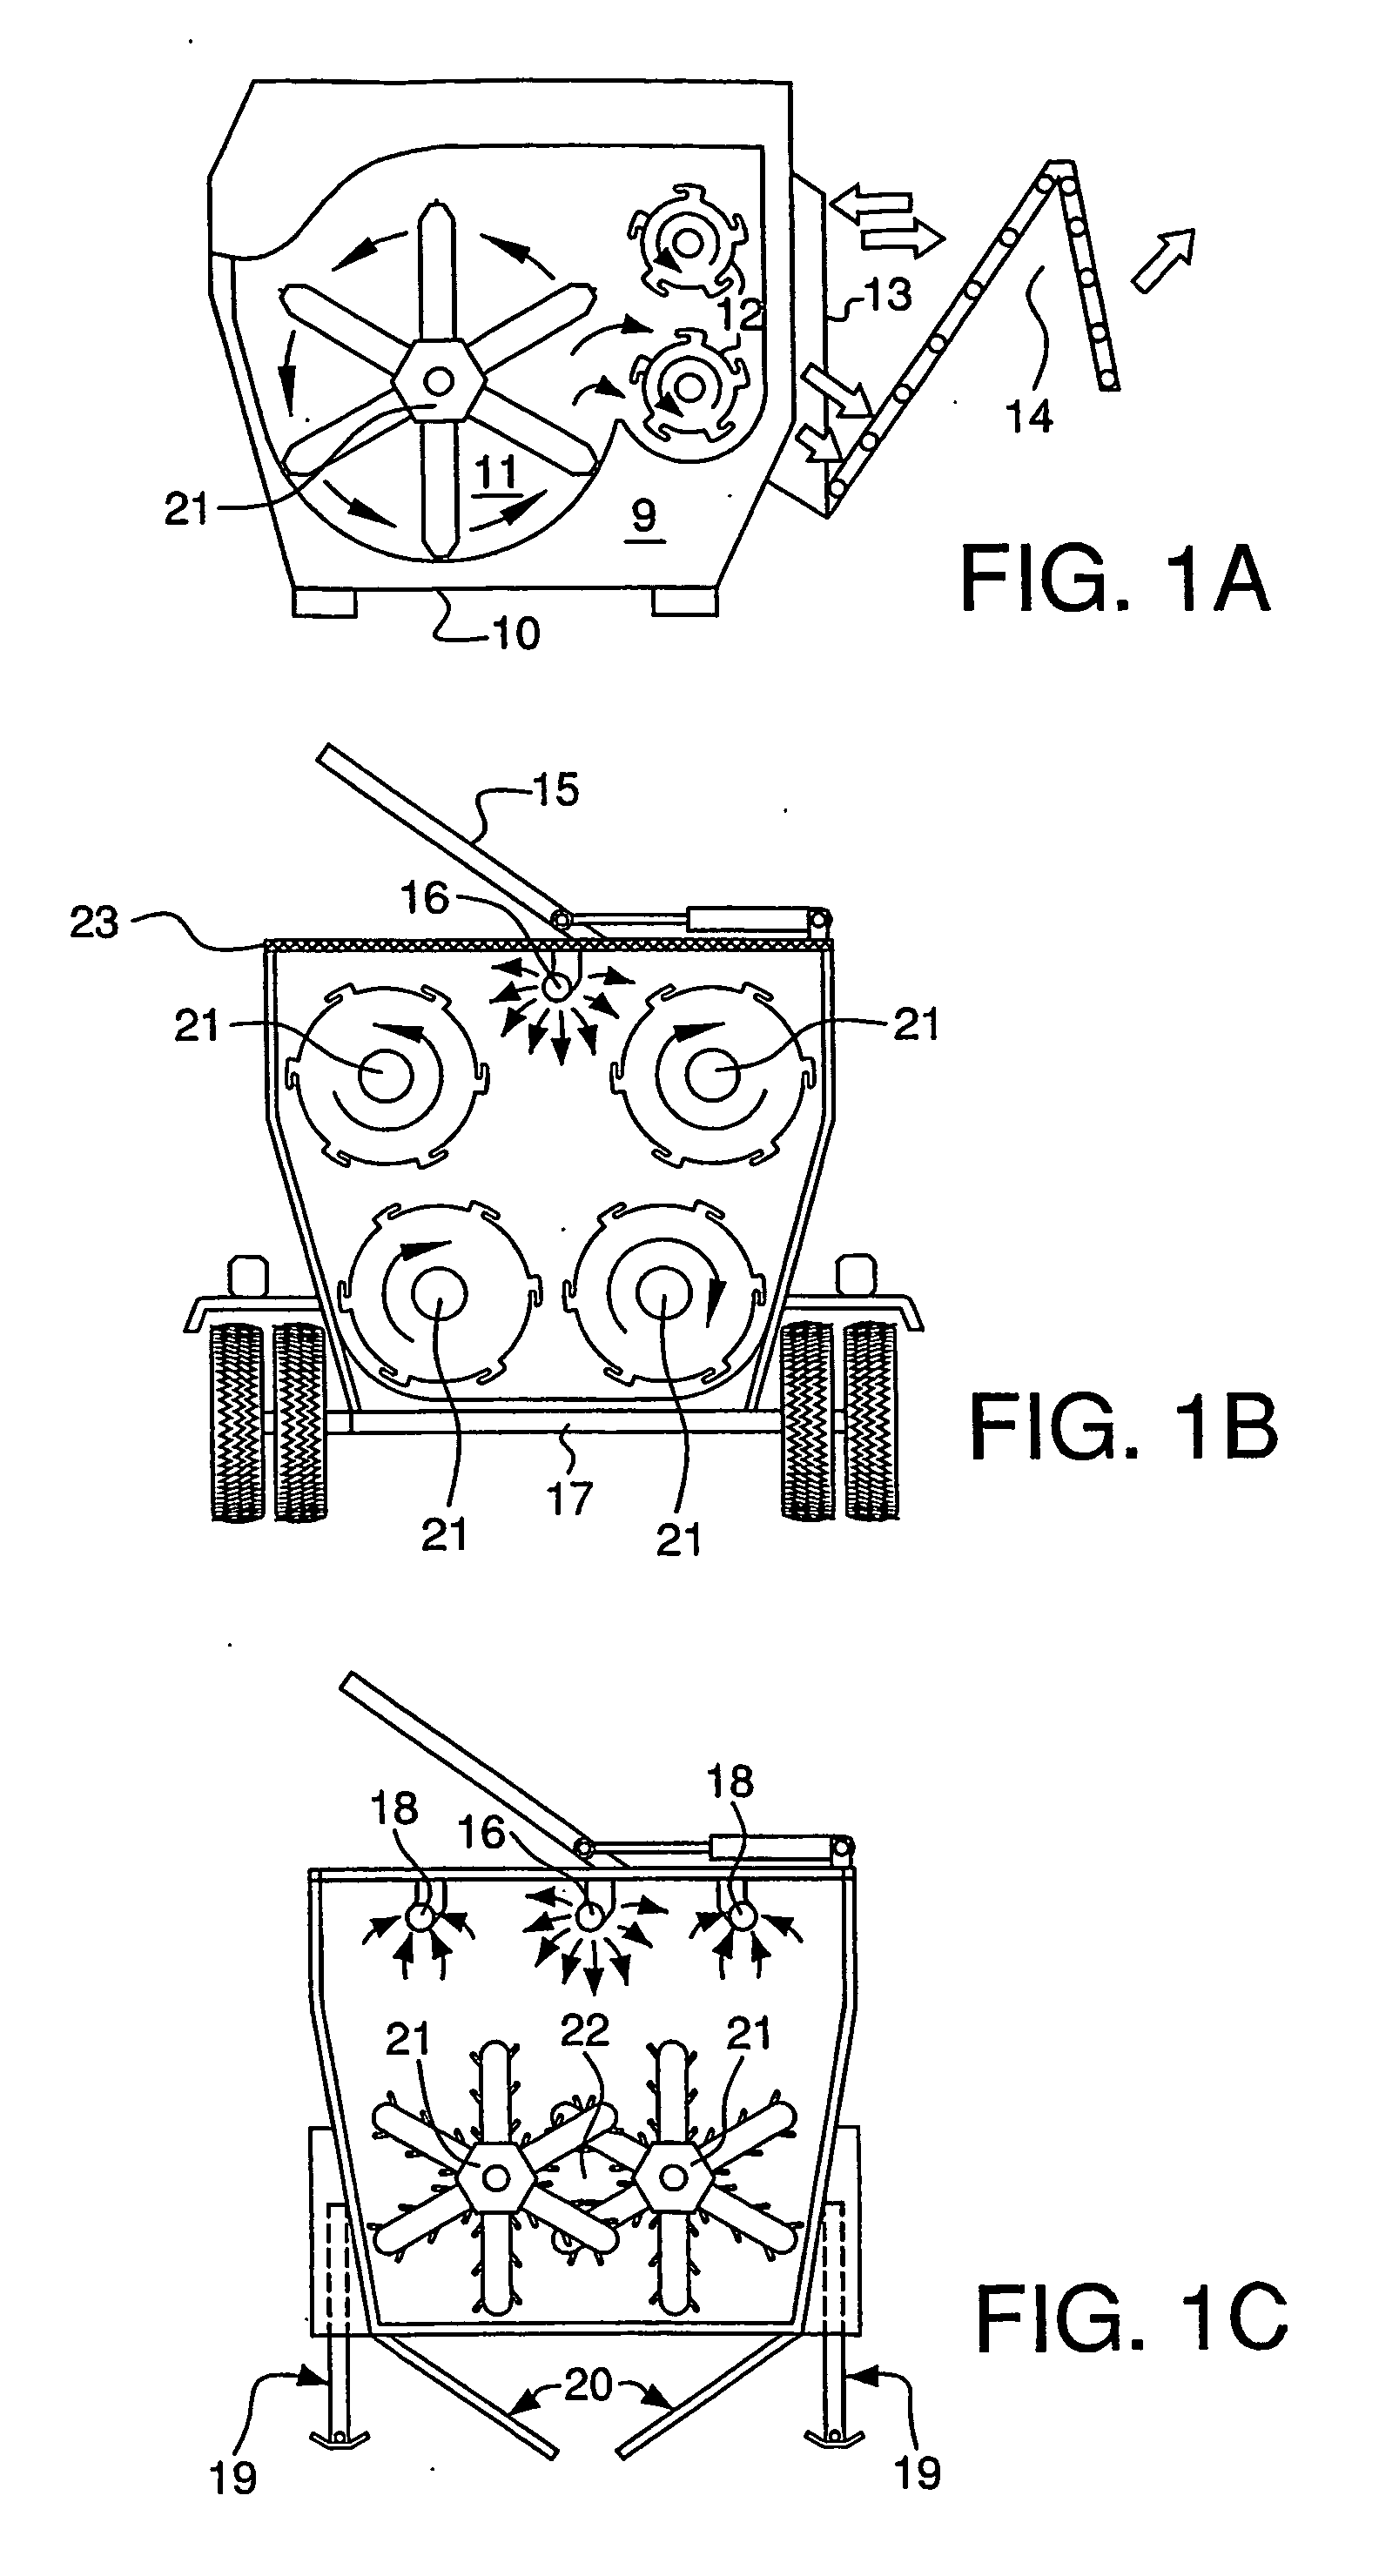 Process and apparatus for further processing of sewage sludge and other materials to reduce pathogens and toxins